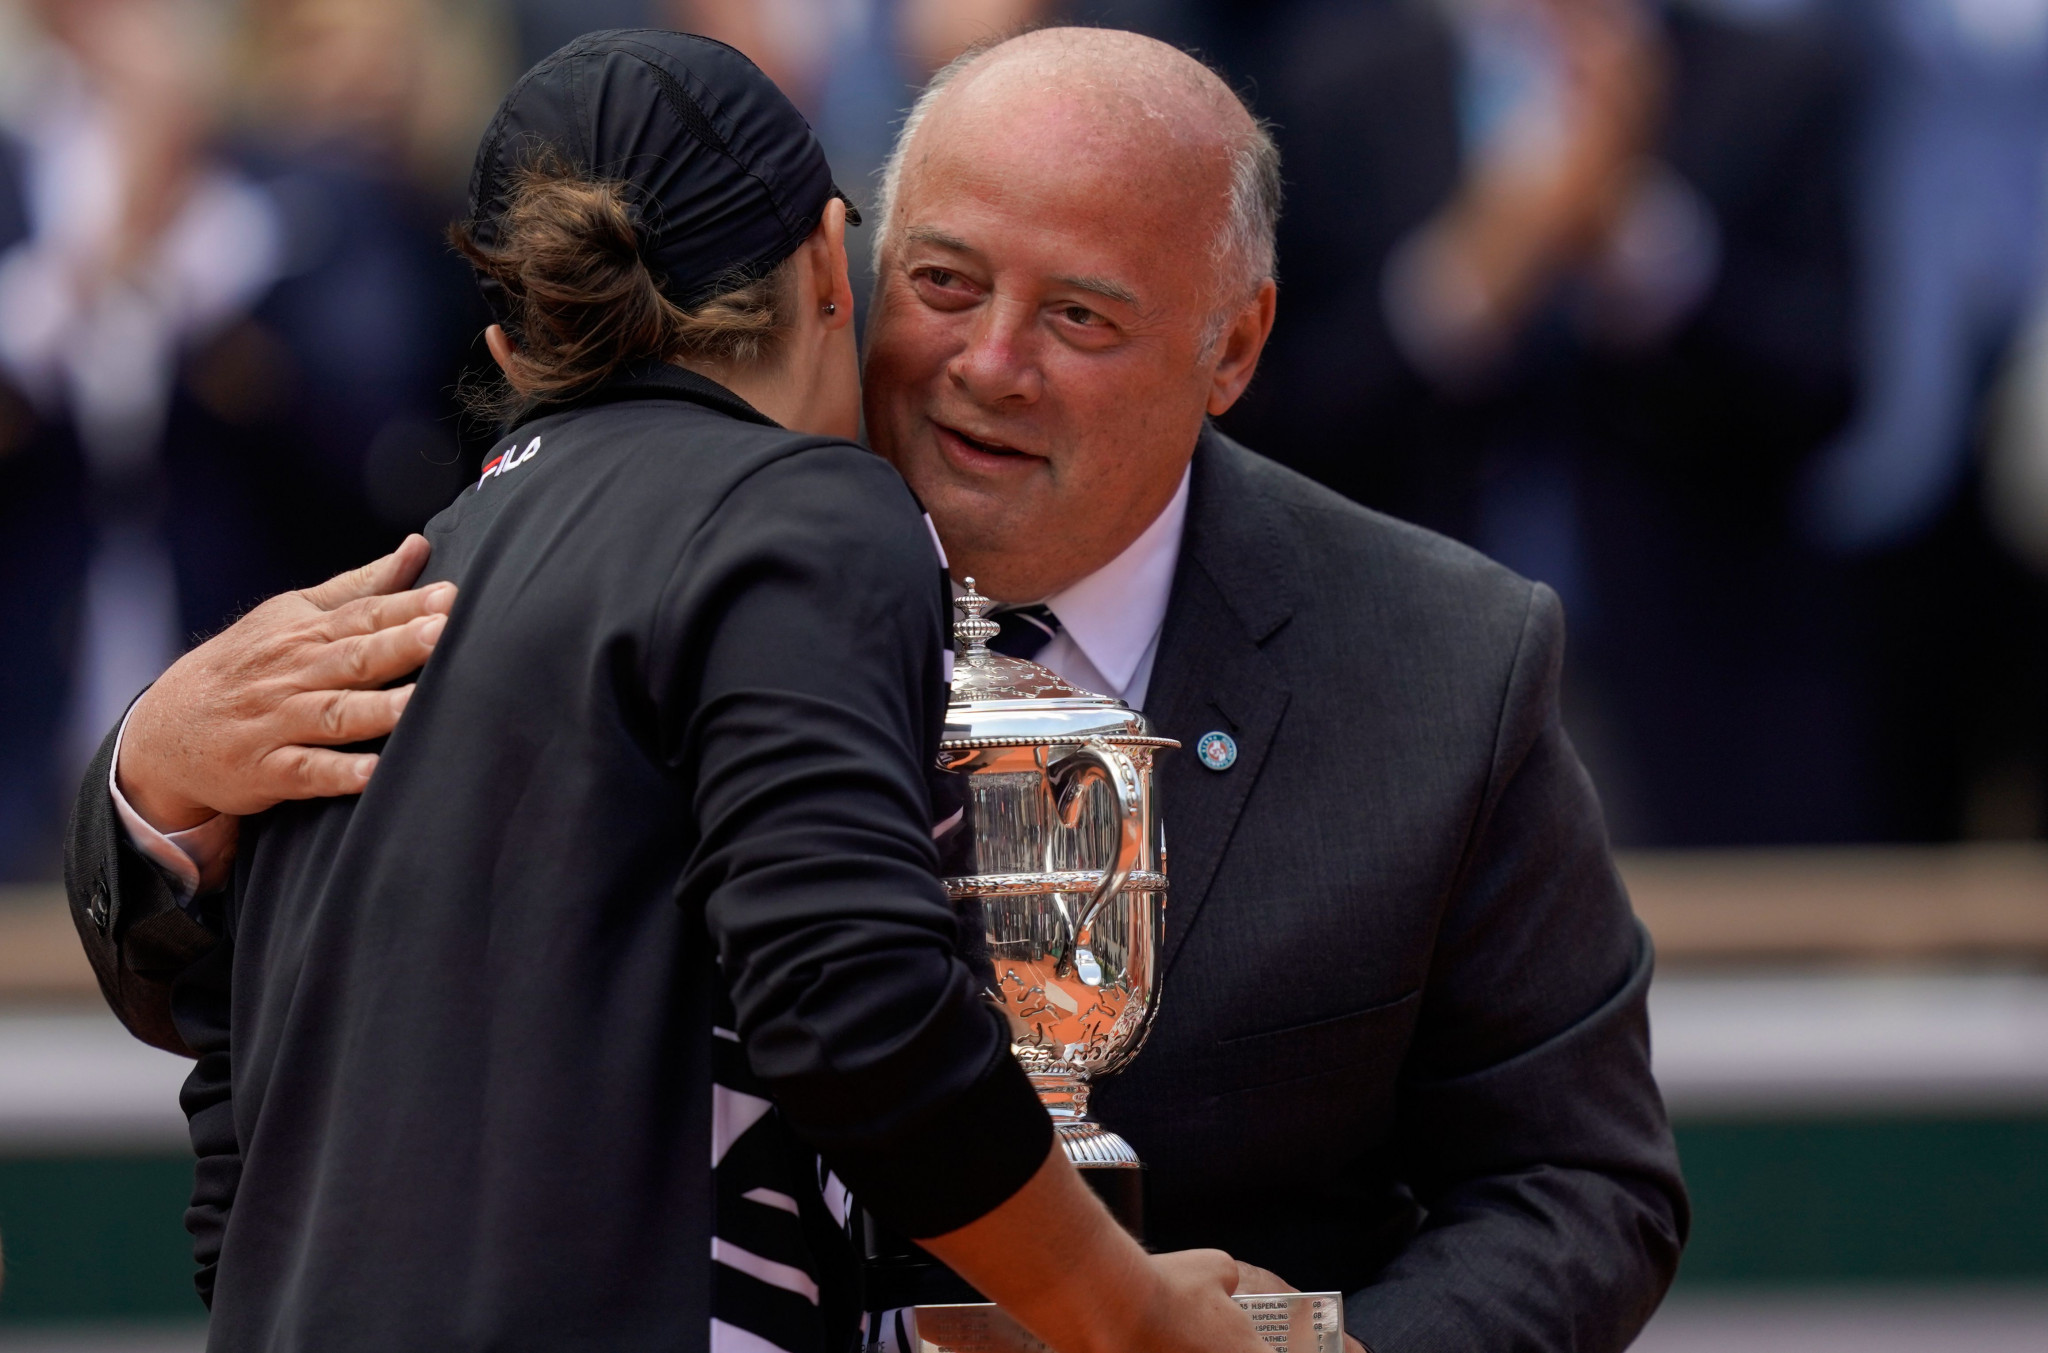 French Tennis Federation President Bernard Giudicelli has suggested the French Open could be held without fans ©Getty Images